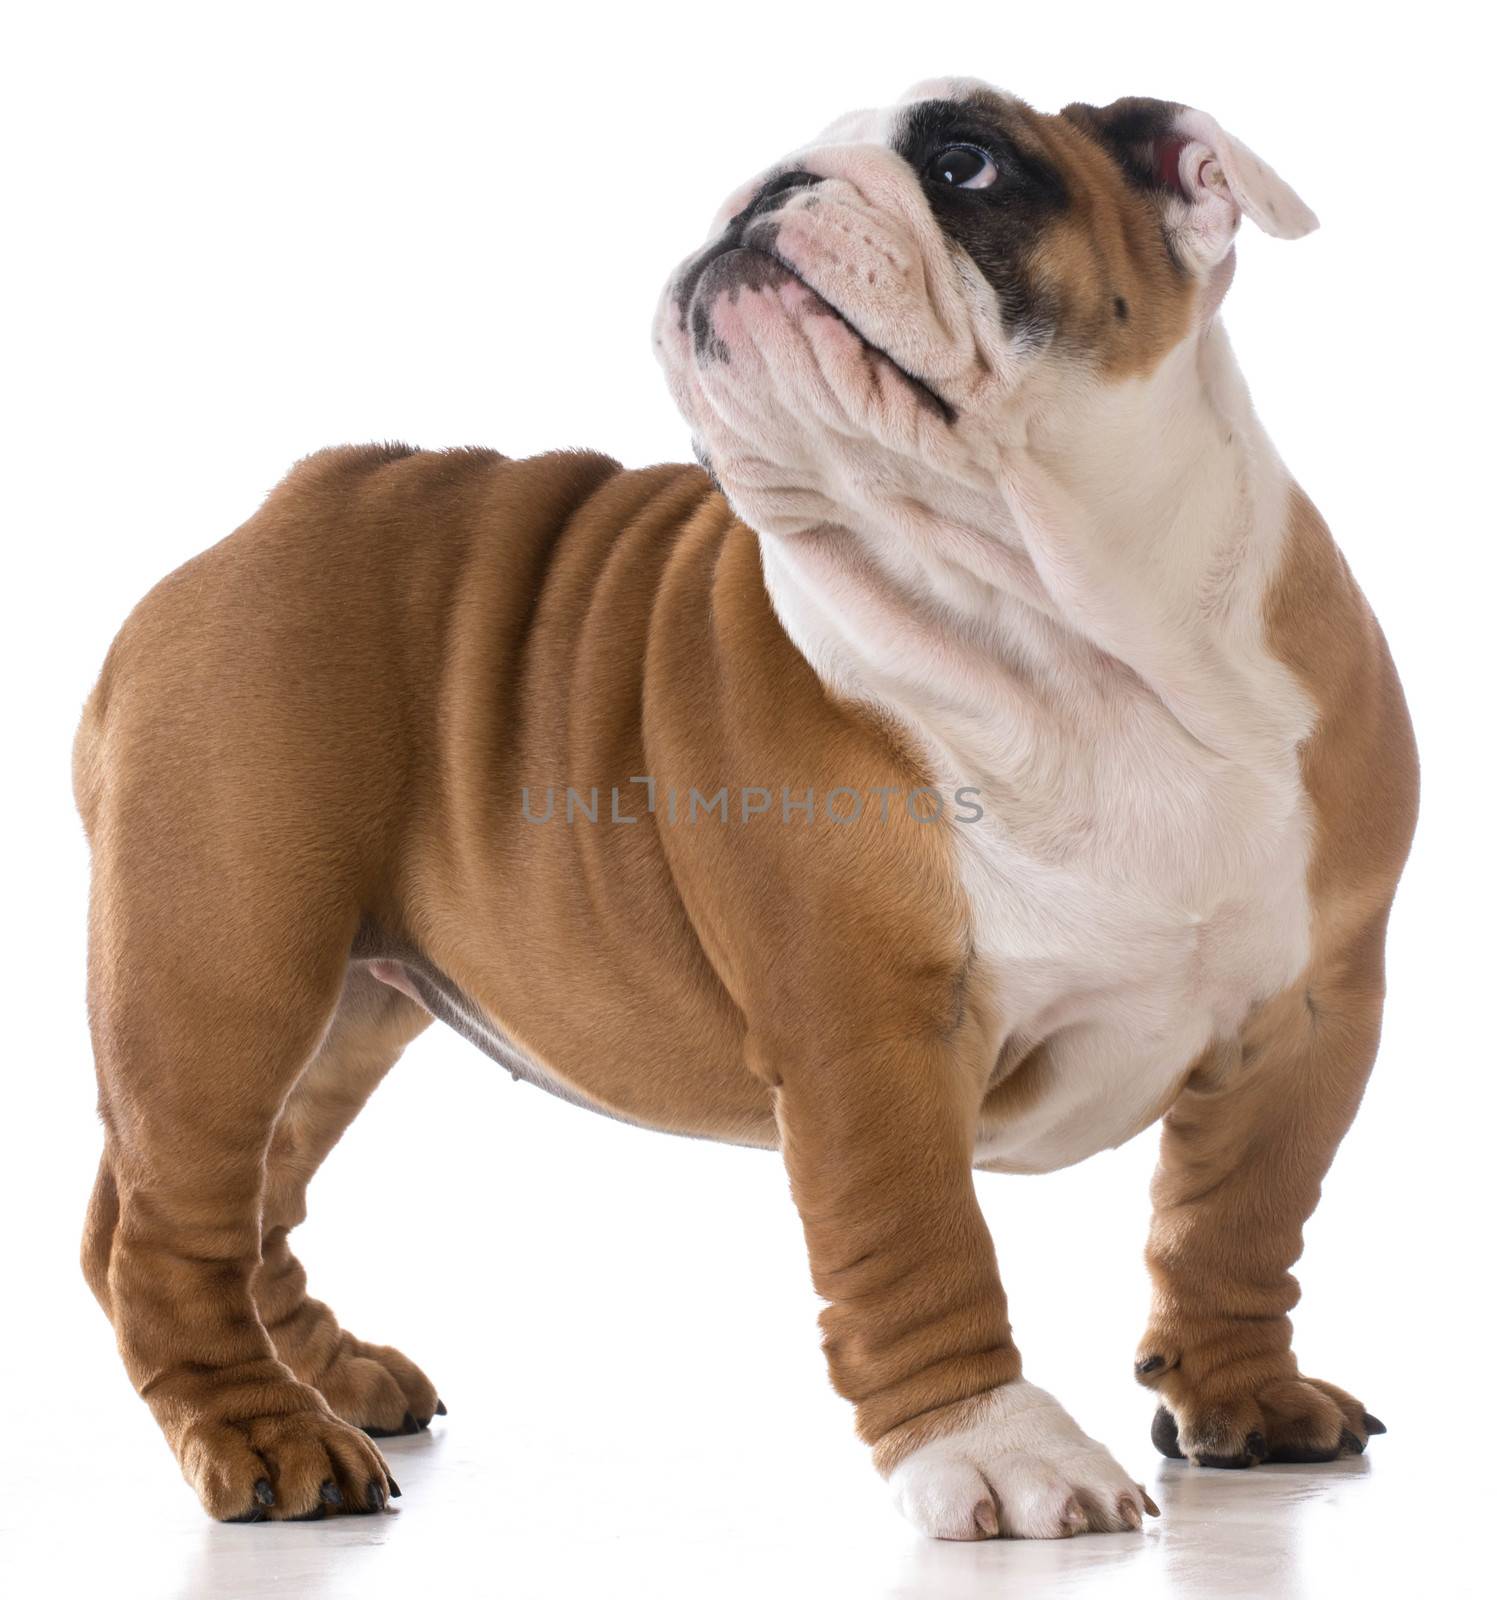 cute puppy standing looking up on white background - bulldog three months old